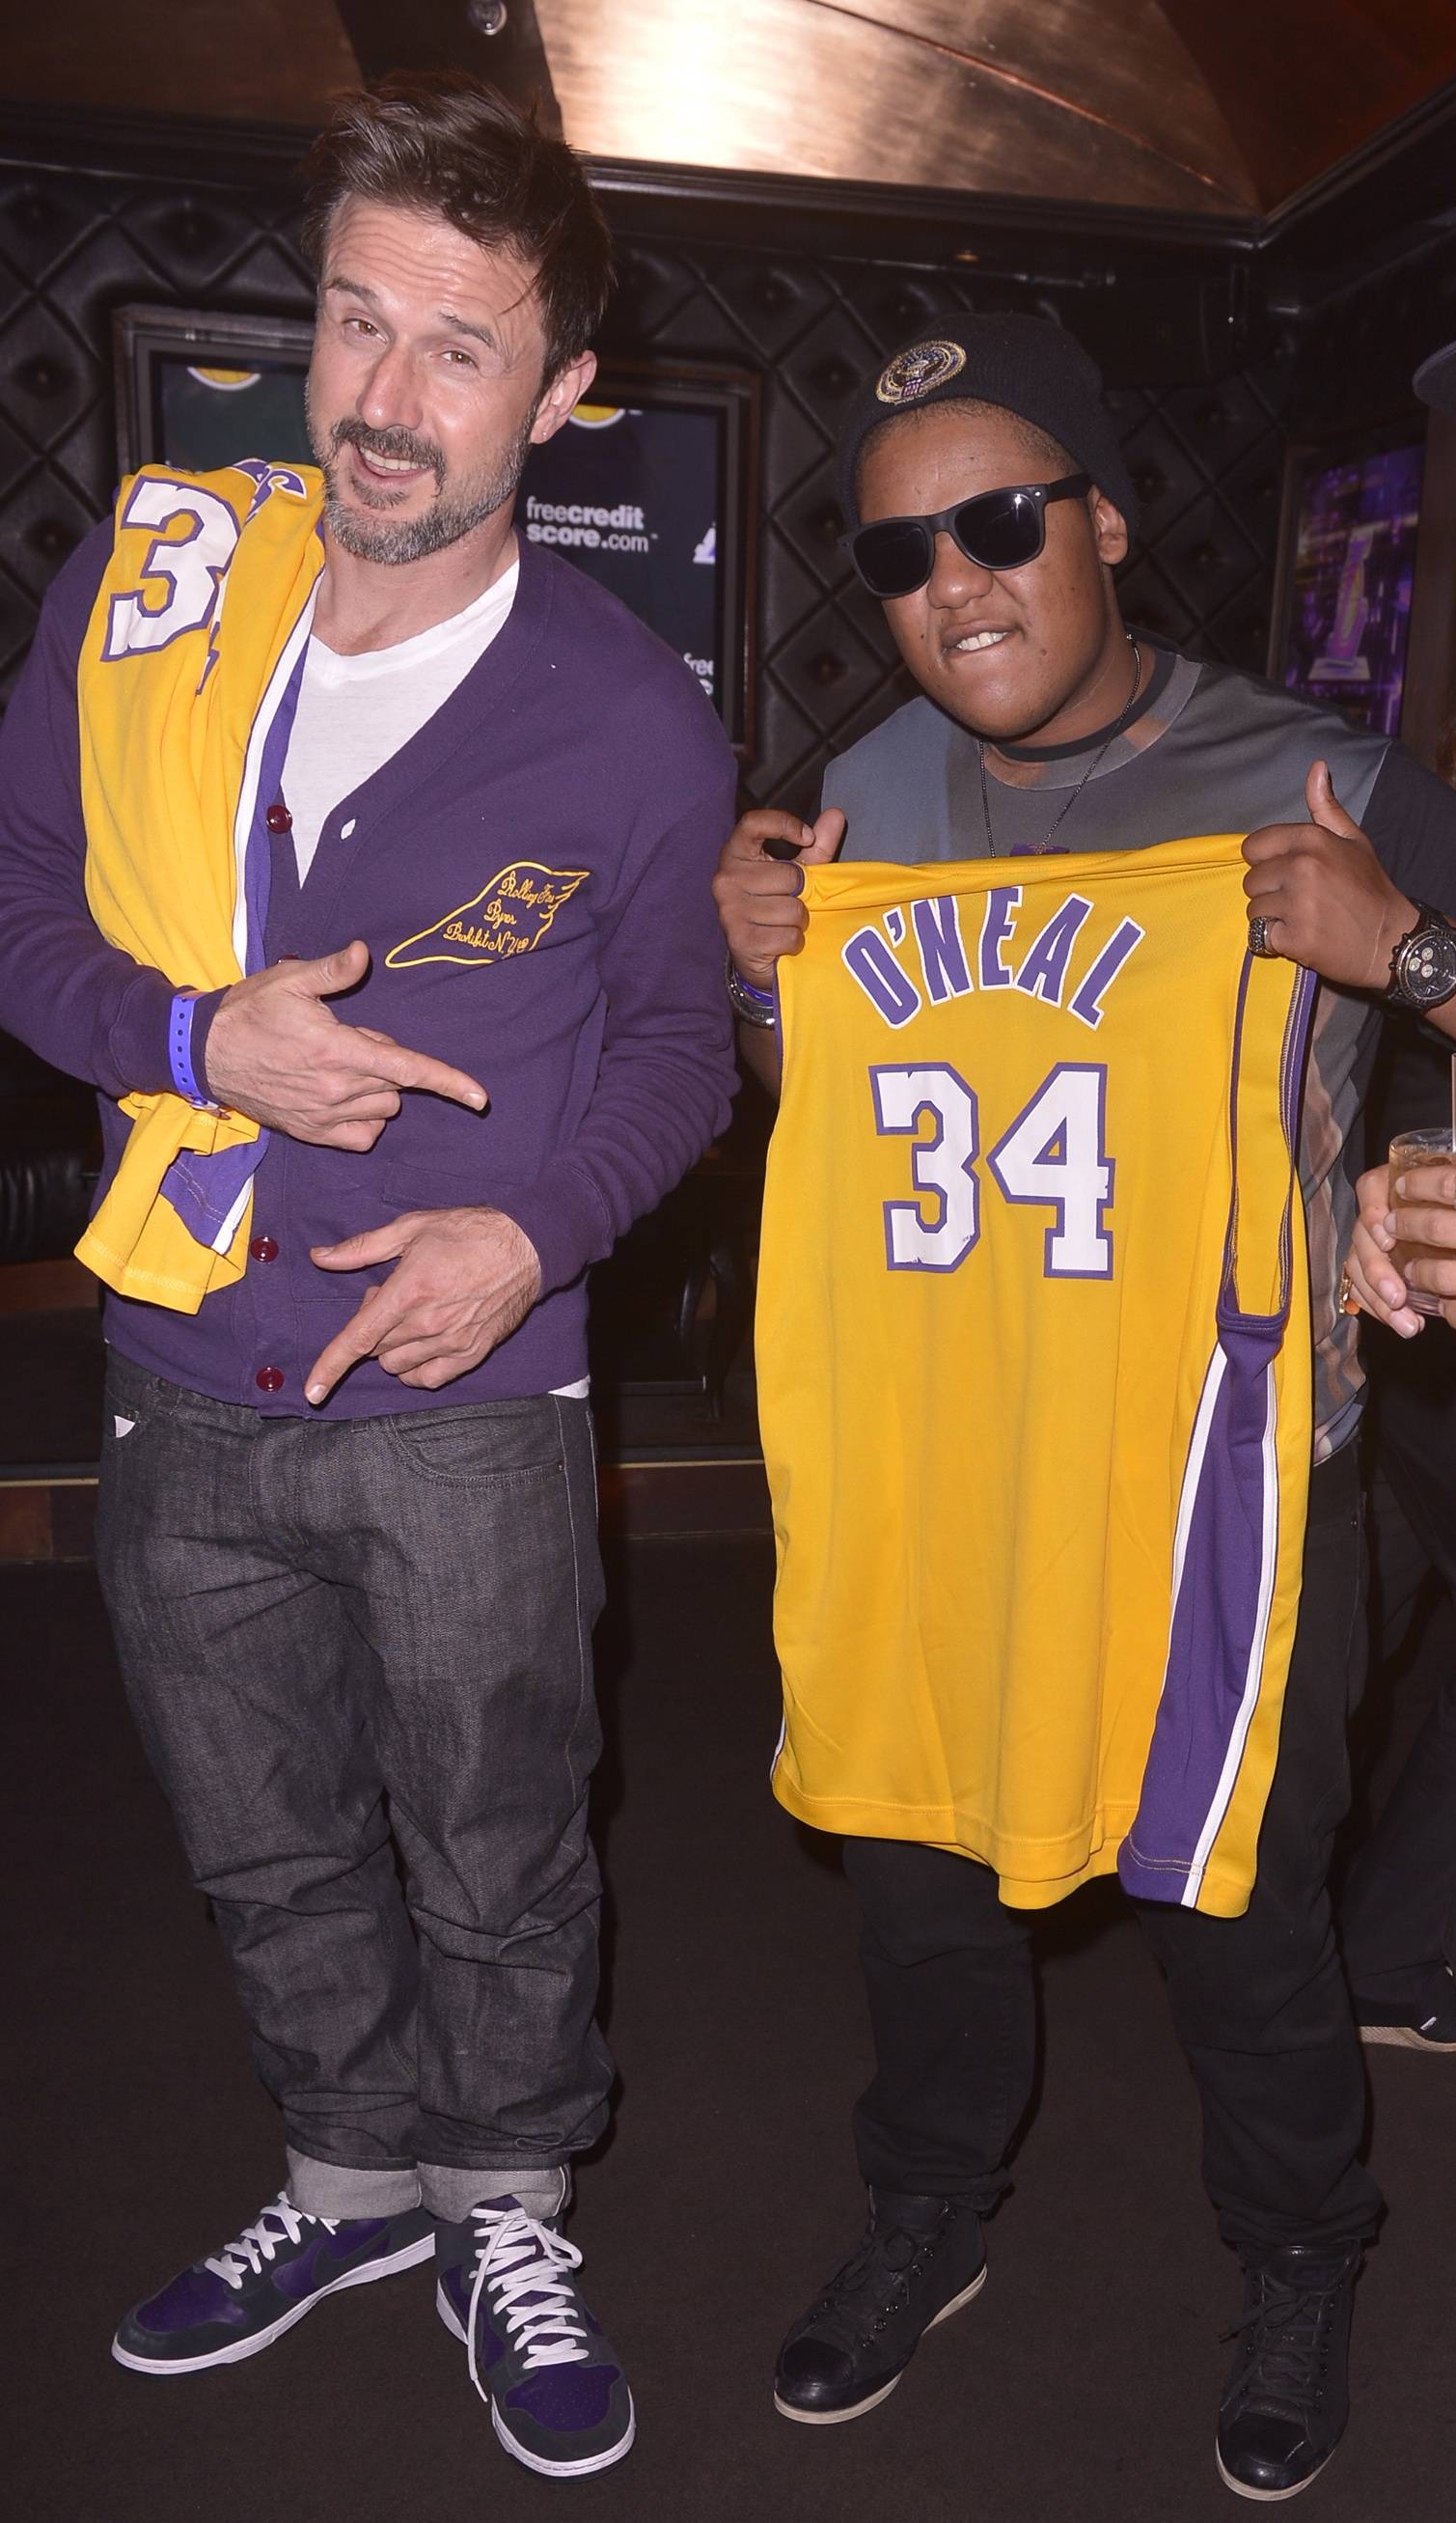 Shaquille O'Neal's Retirement of his jersey party